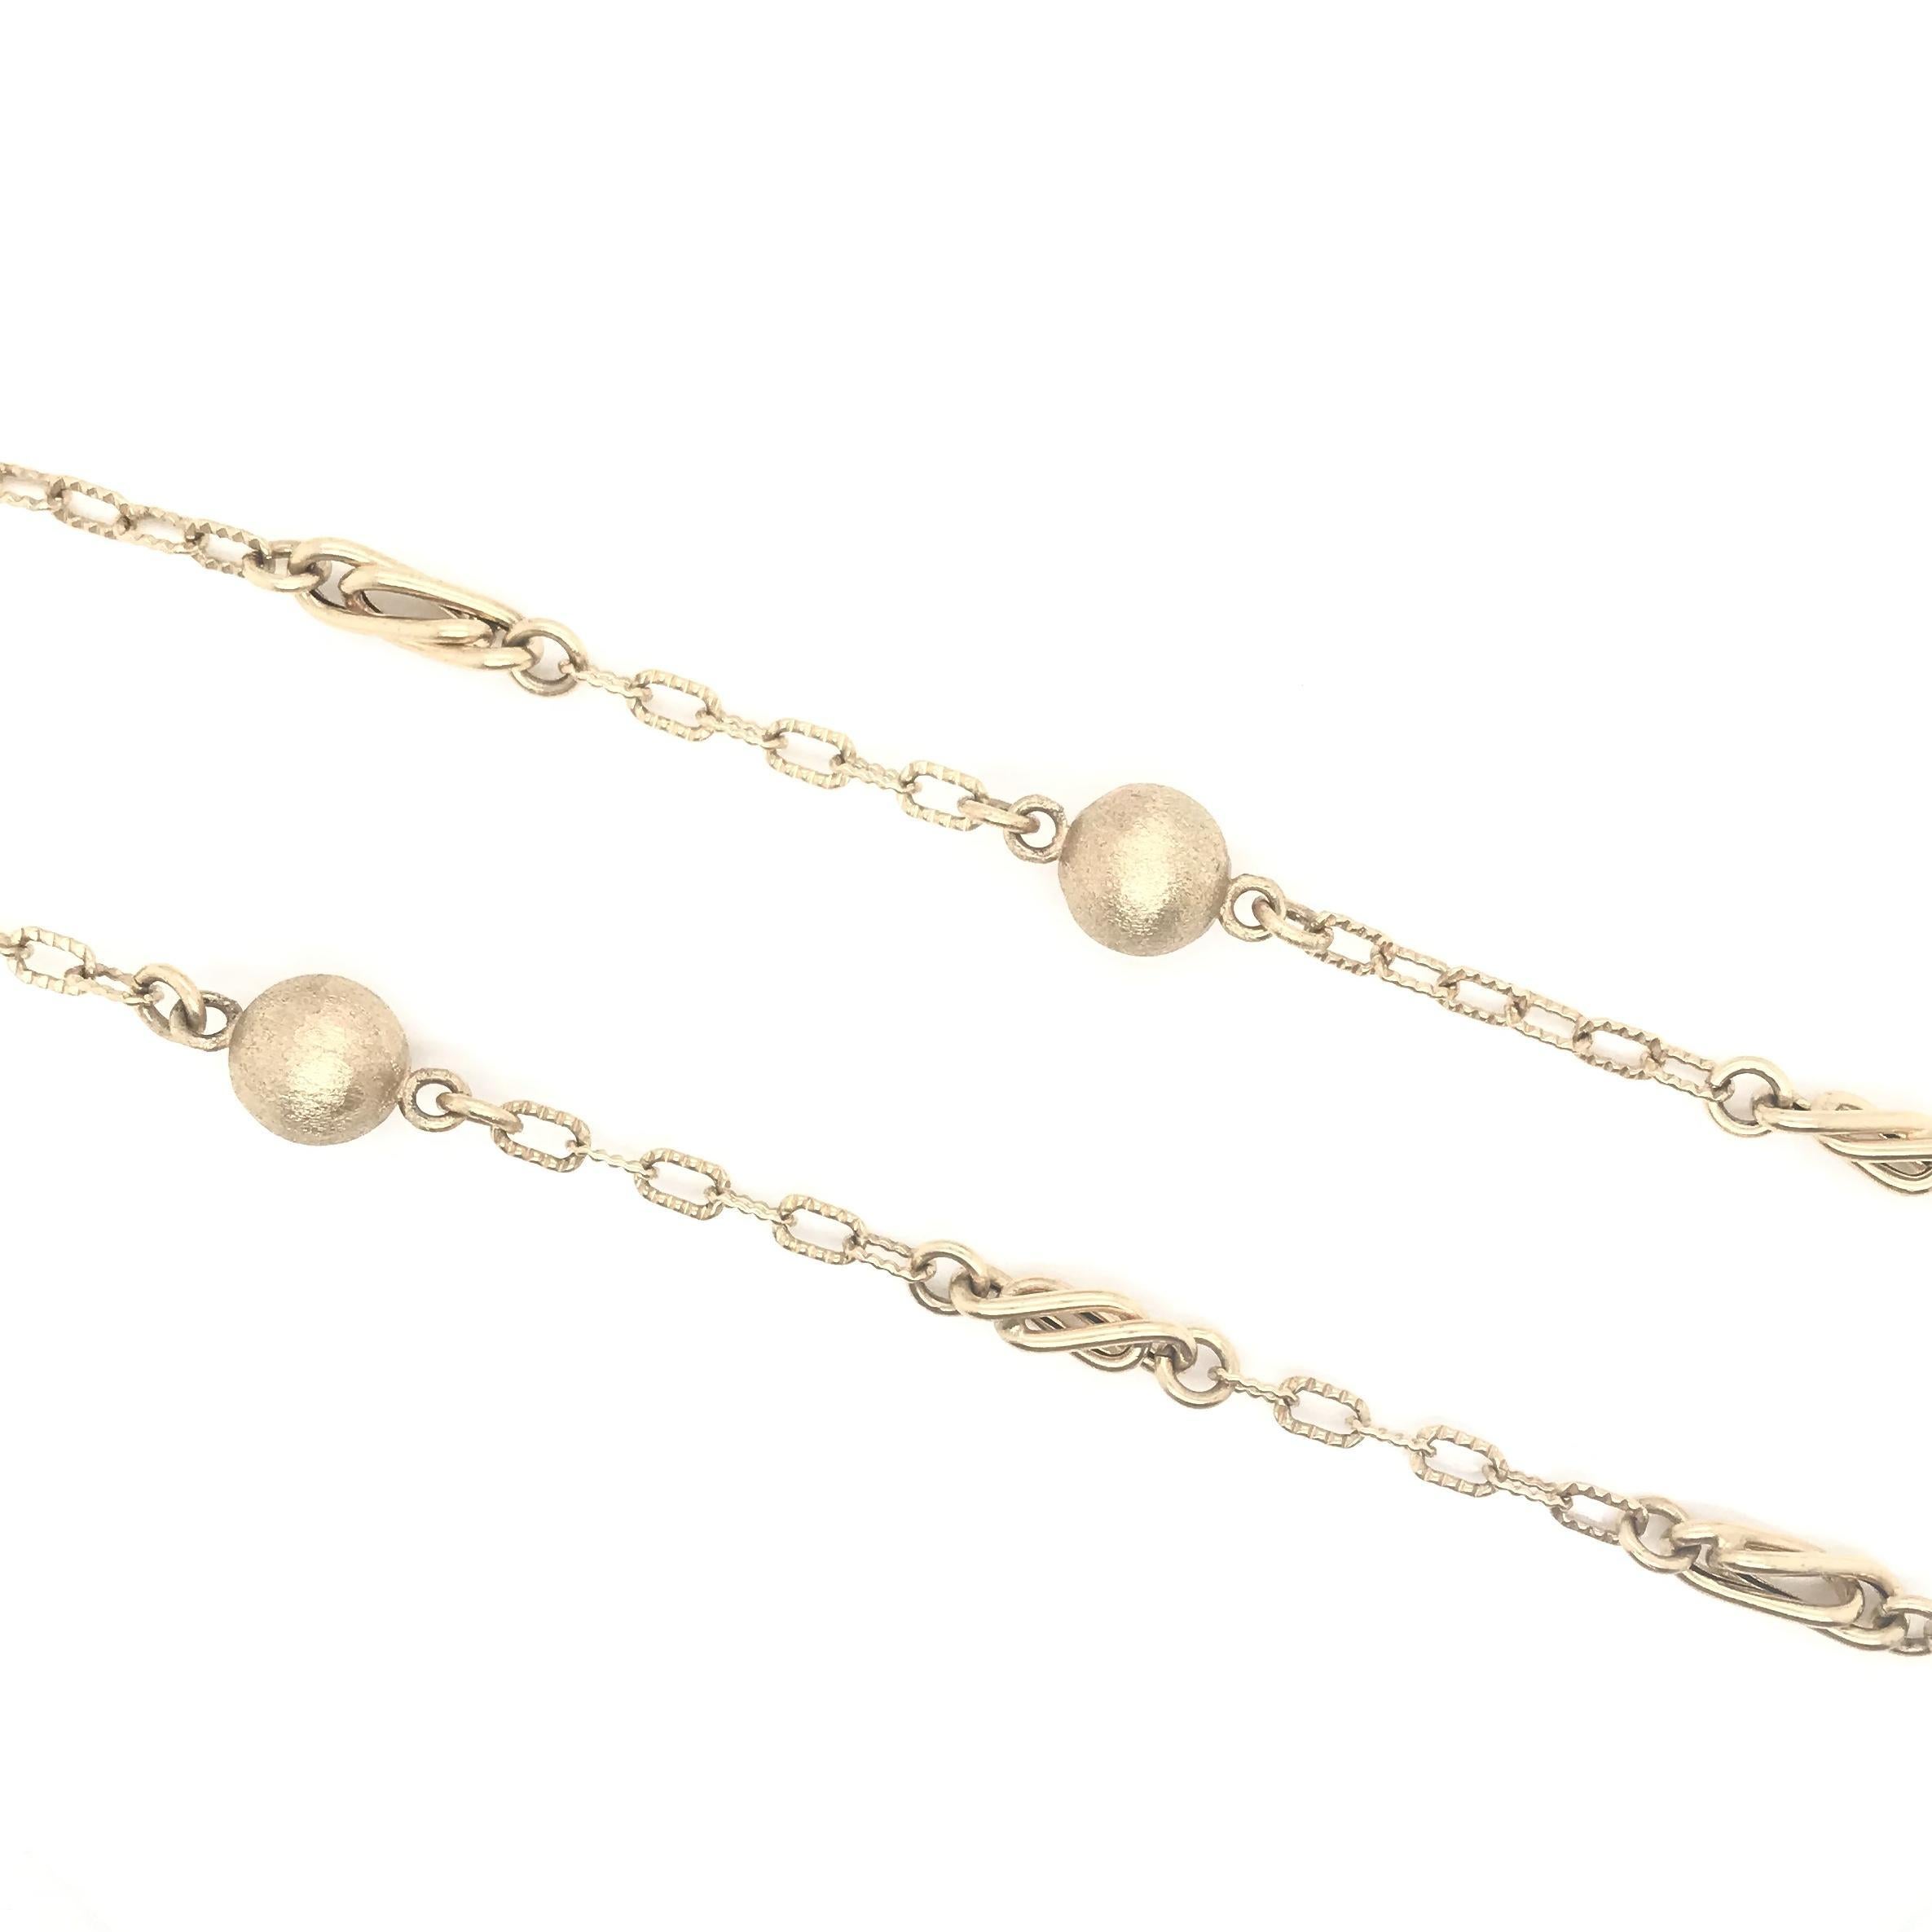 This contemporary estate 14K gold chain is the perfect piece to introduce more gold into your everyday jewelry collection. Endlessly versatile, this piece looks exceptionally gorgeous layered with a pearl or diamond tennis necklace. One could still